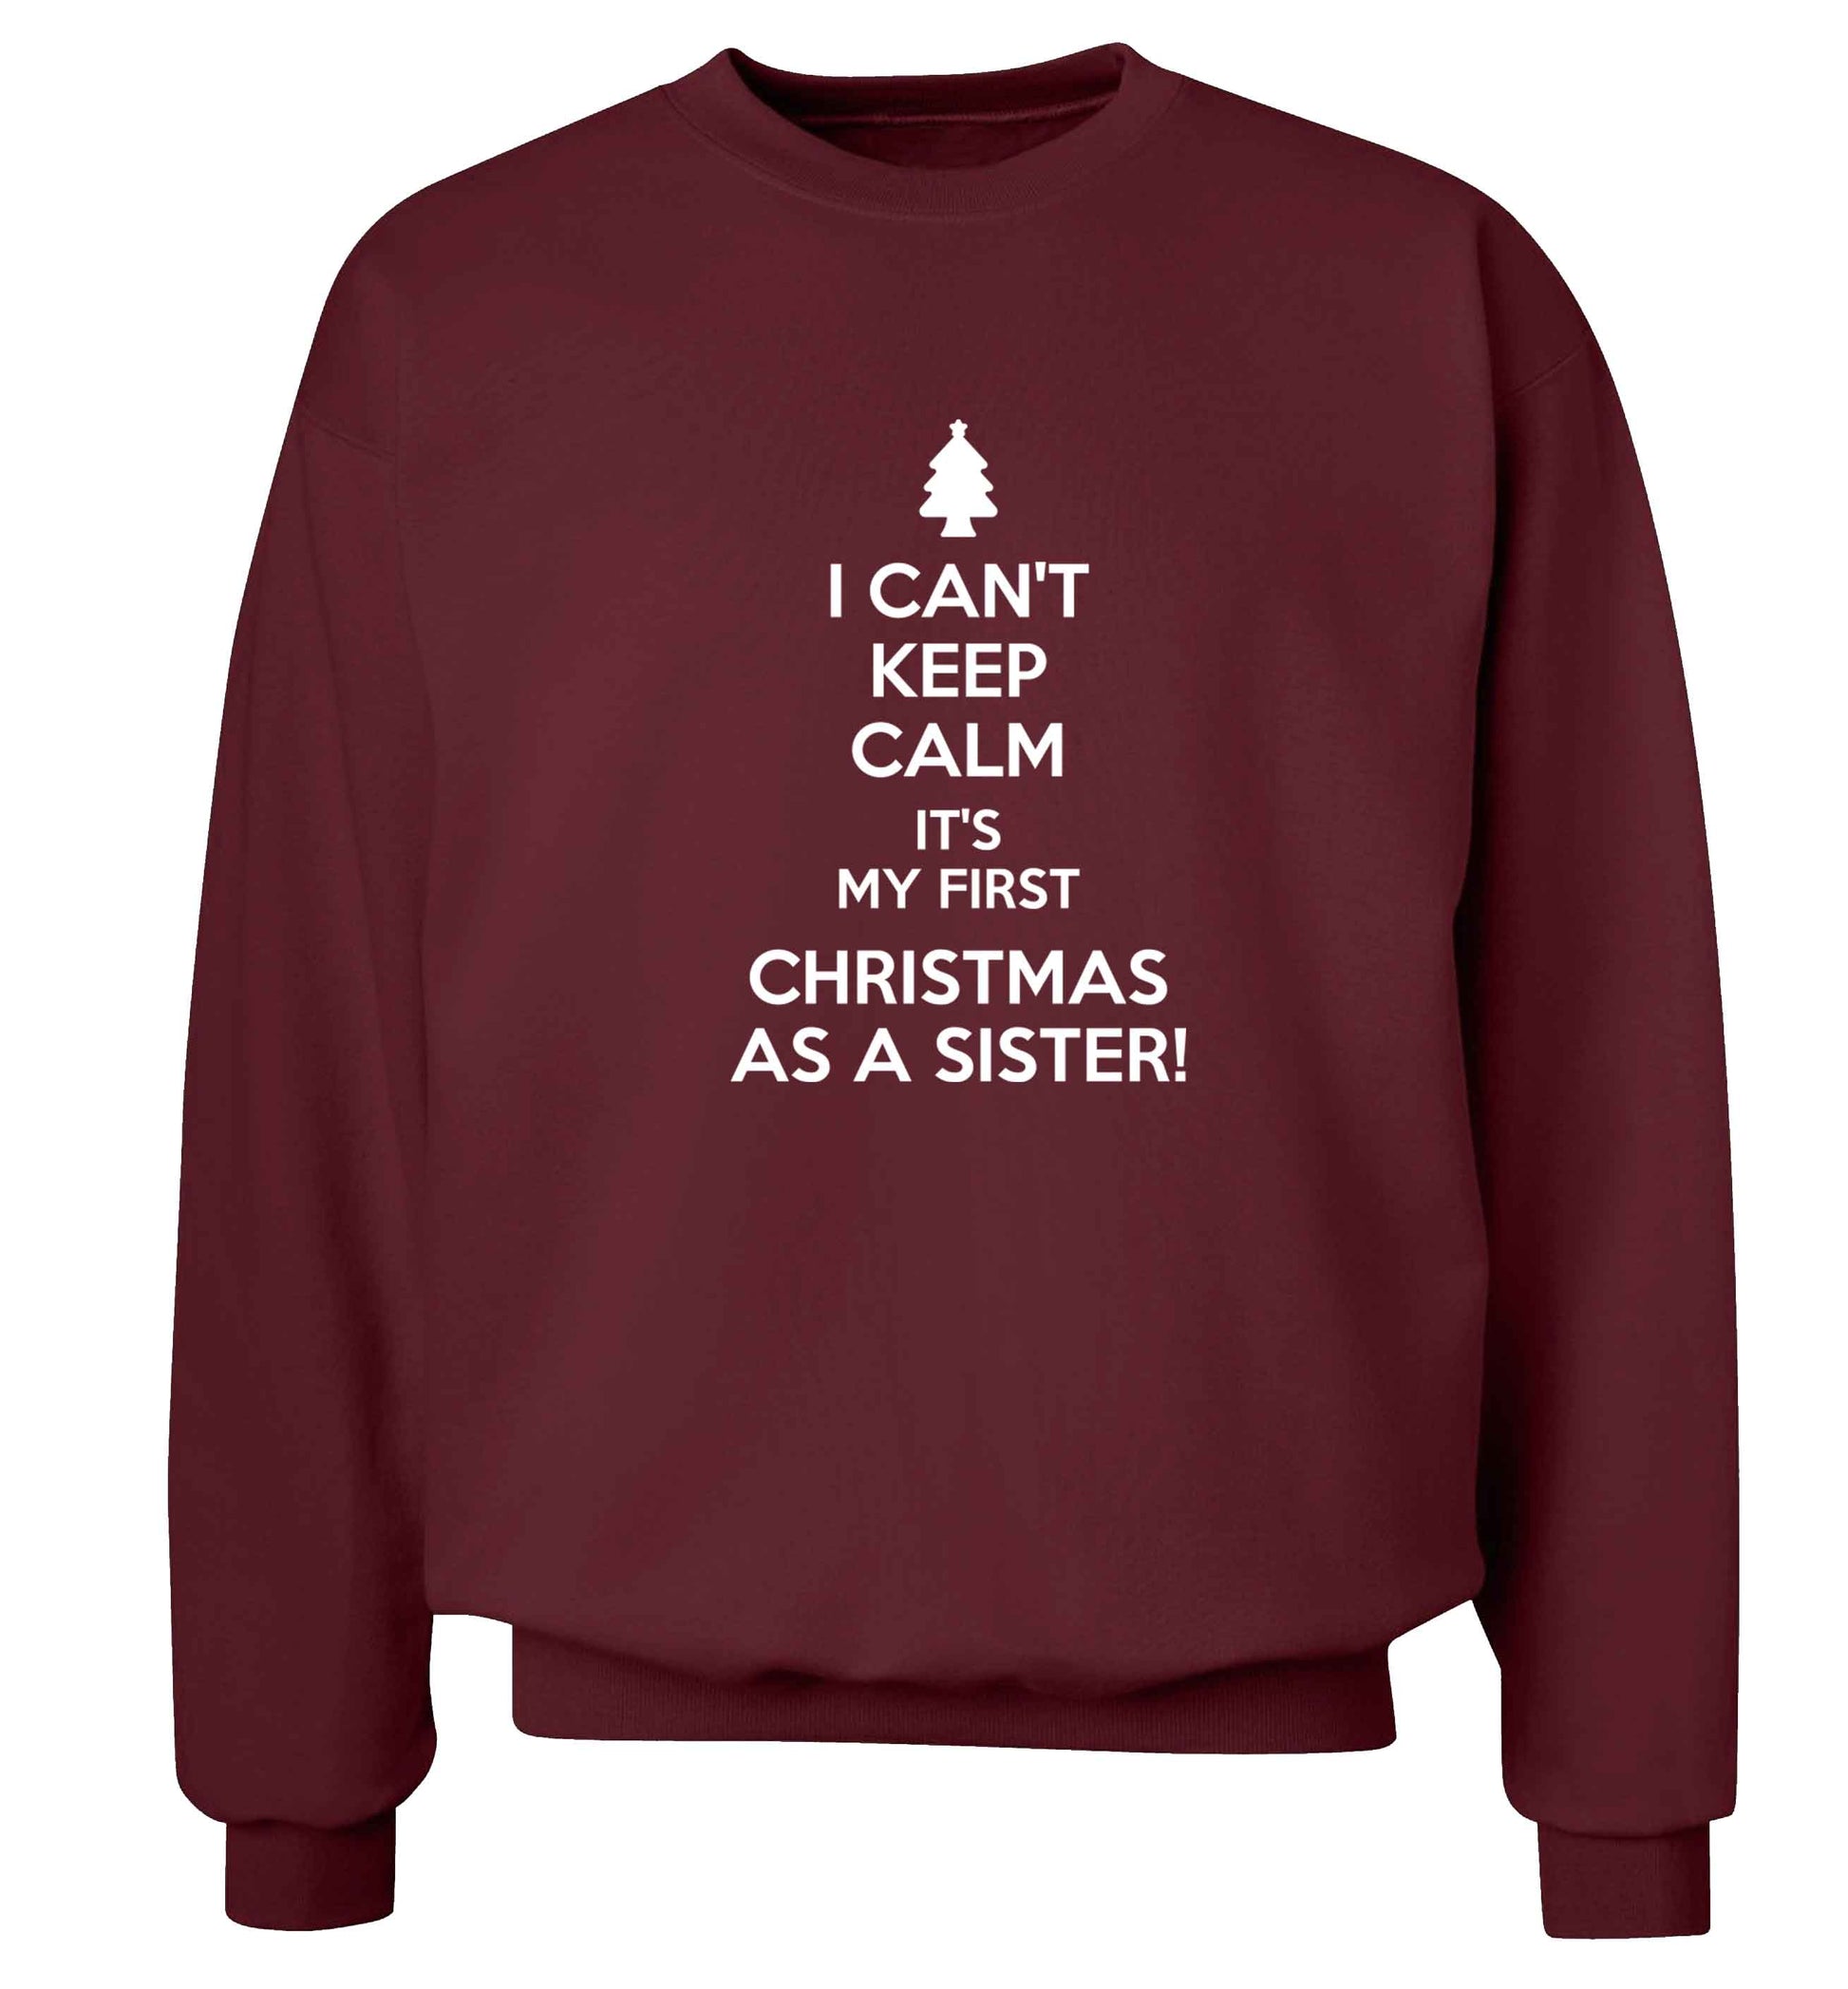 I can't keep calm it's my first Christmas as a sister! Adult's unisex maroon Sweater 2XL